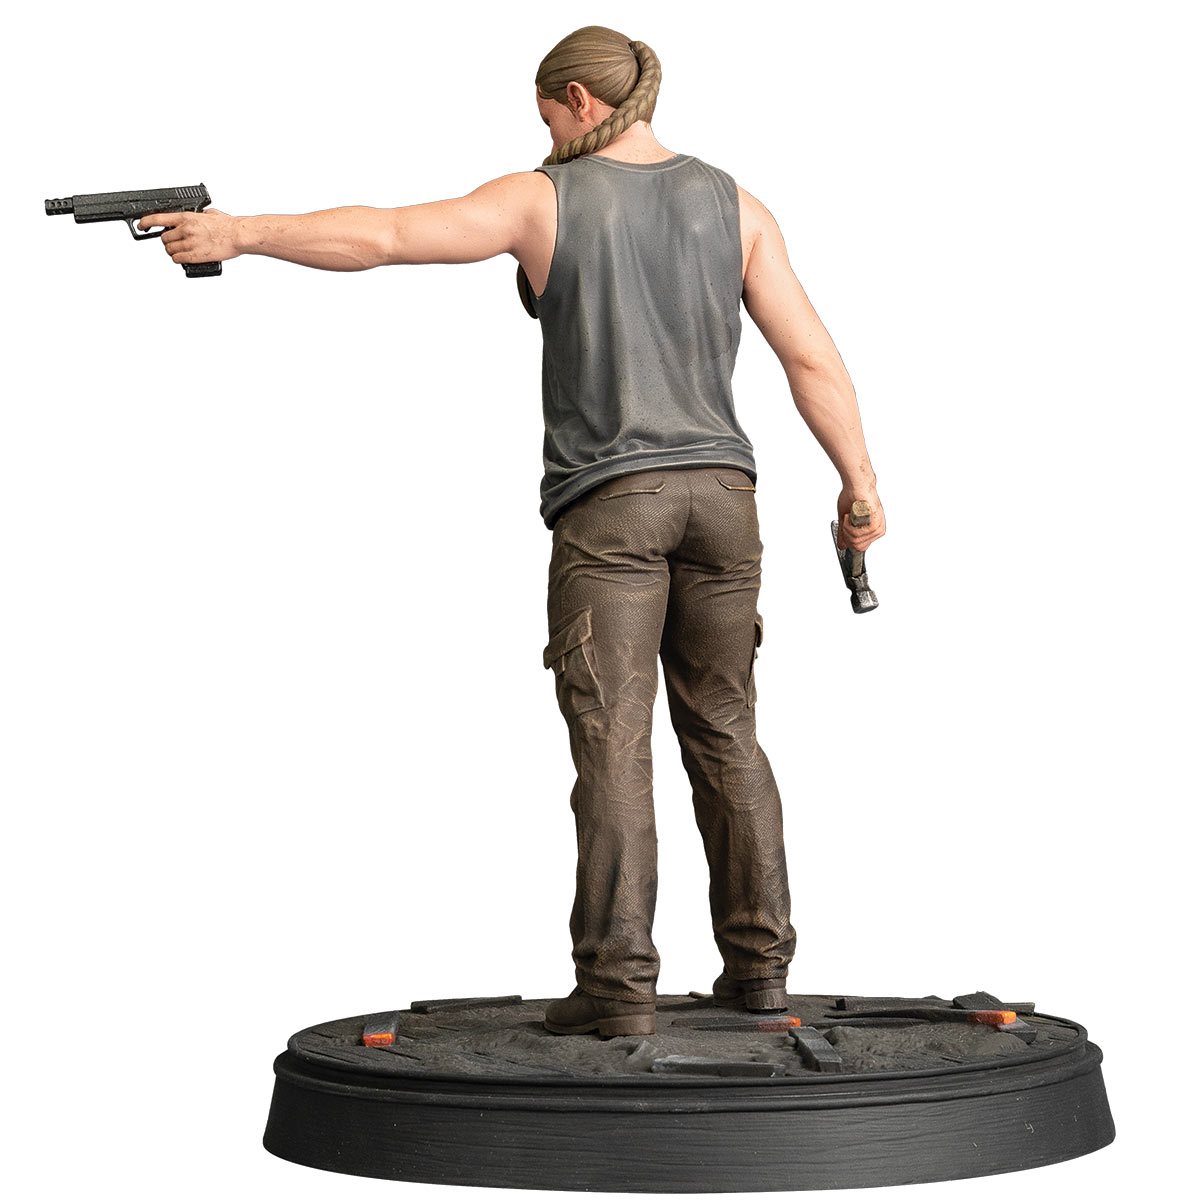  Dark Horse Deluxe 8 Inches The Last of Us Part II